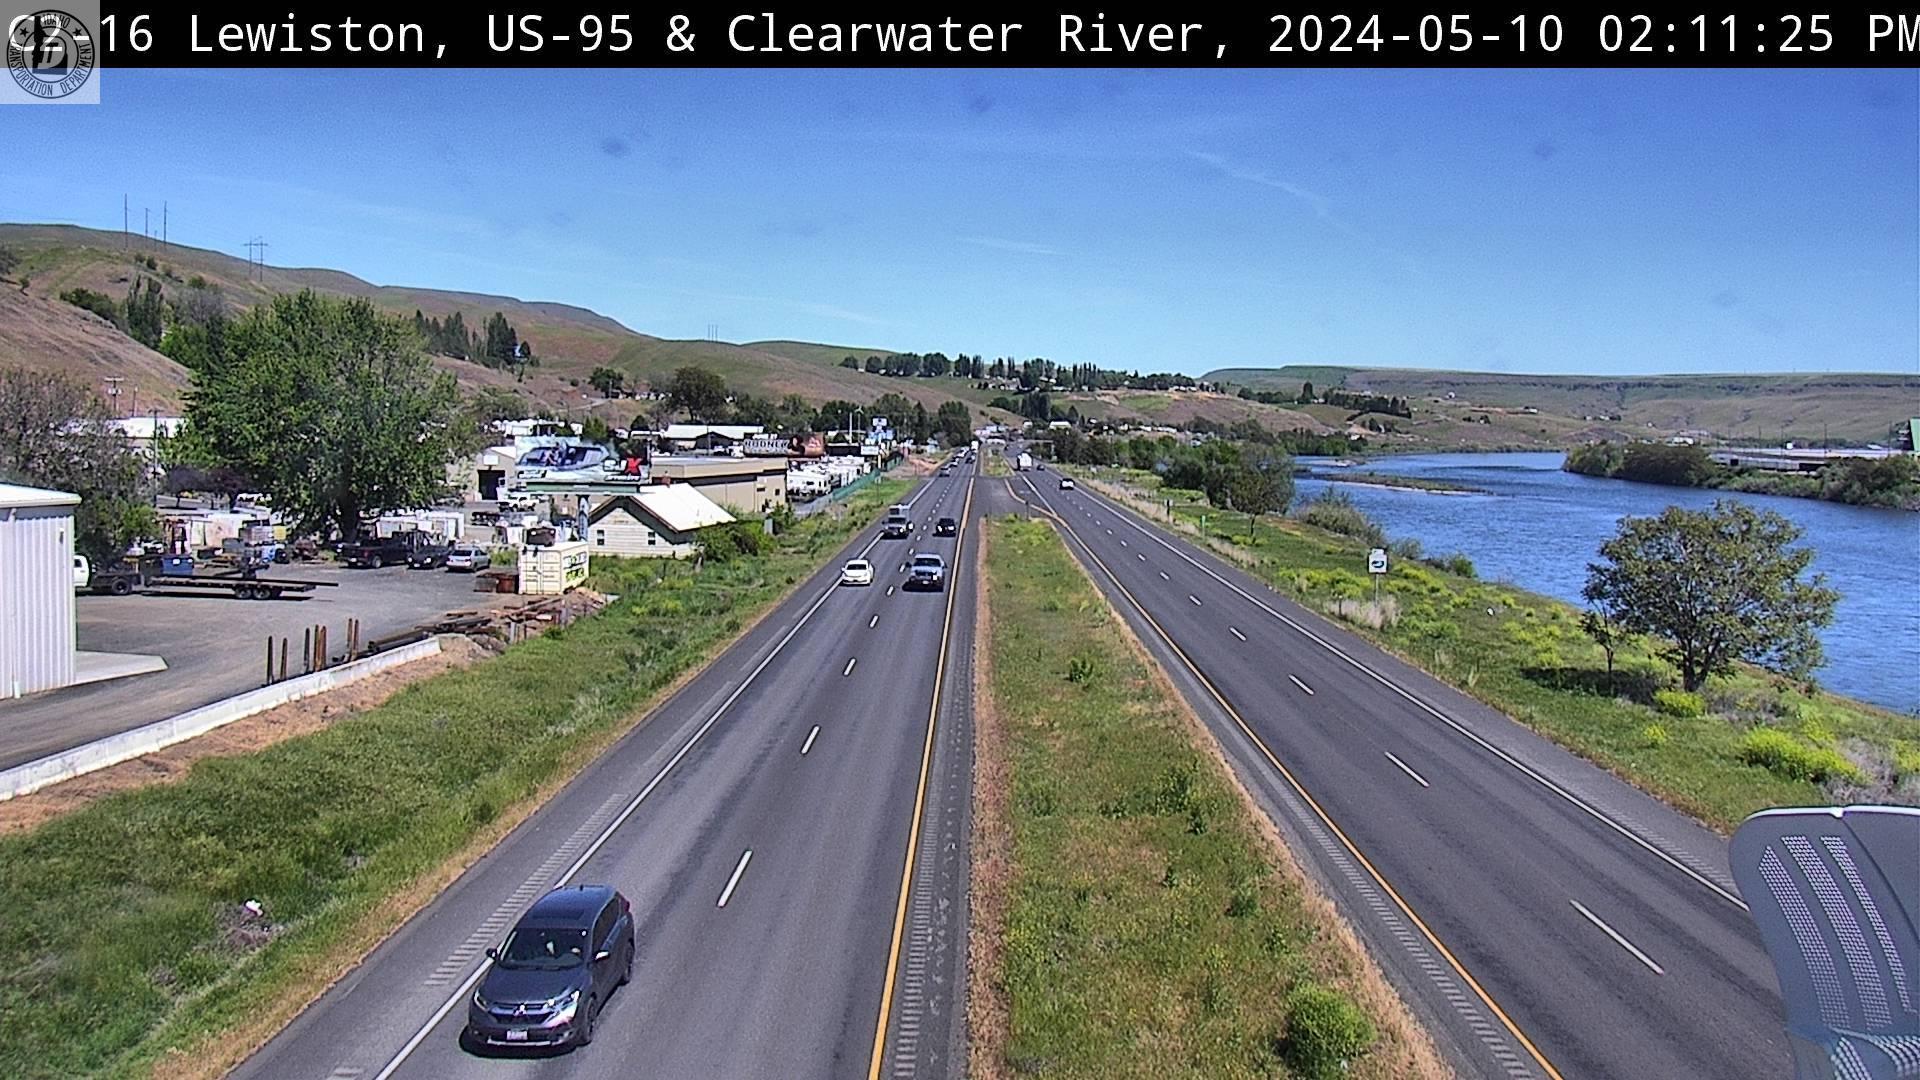 Lewiston: US 95: 38th Clearwater River: Southbound Traffic Camera